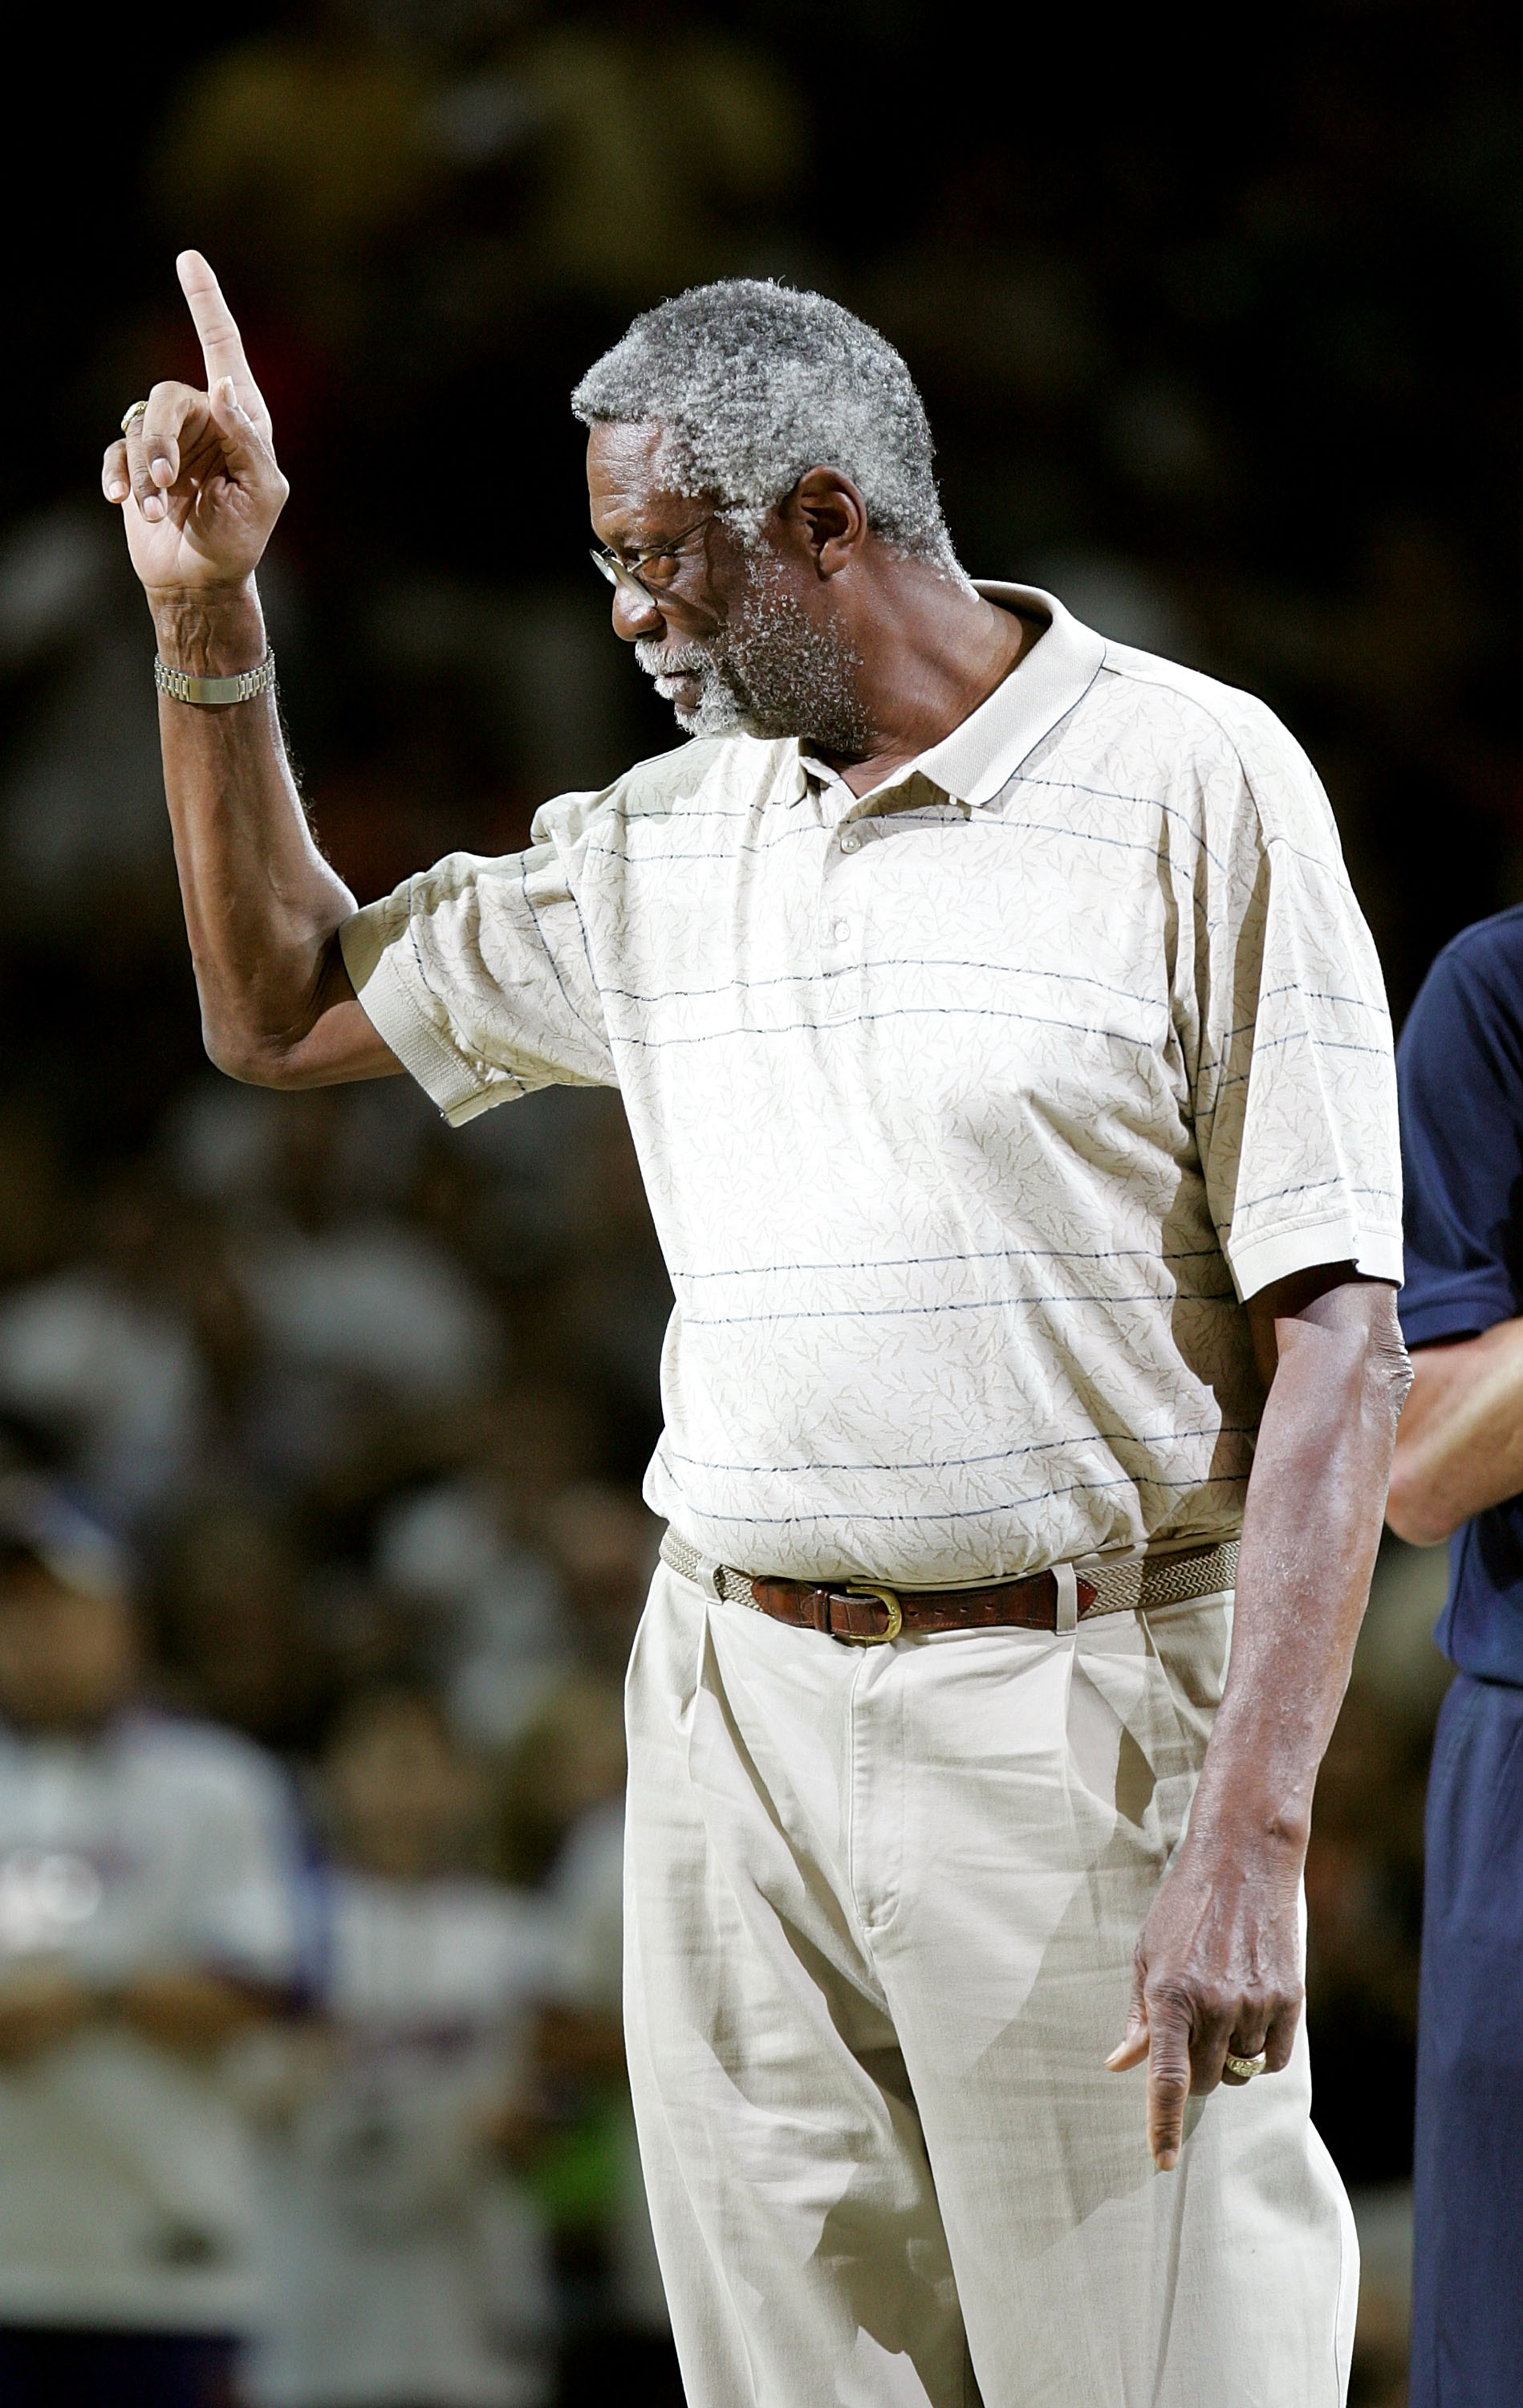 SAN ANTONIO - JUNE 12:  NBA legend Bill Russell is introduced to the crowd during the game between the San Antonio Spurs and the Detroit Pistons in Game two of the 2005 NBA Finals at SBC Center on June 12, 2005 in San Antonio, Texas.  The Spurs defeated t